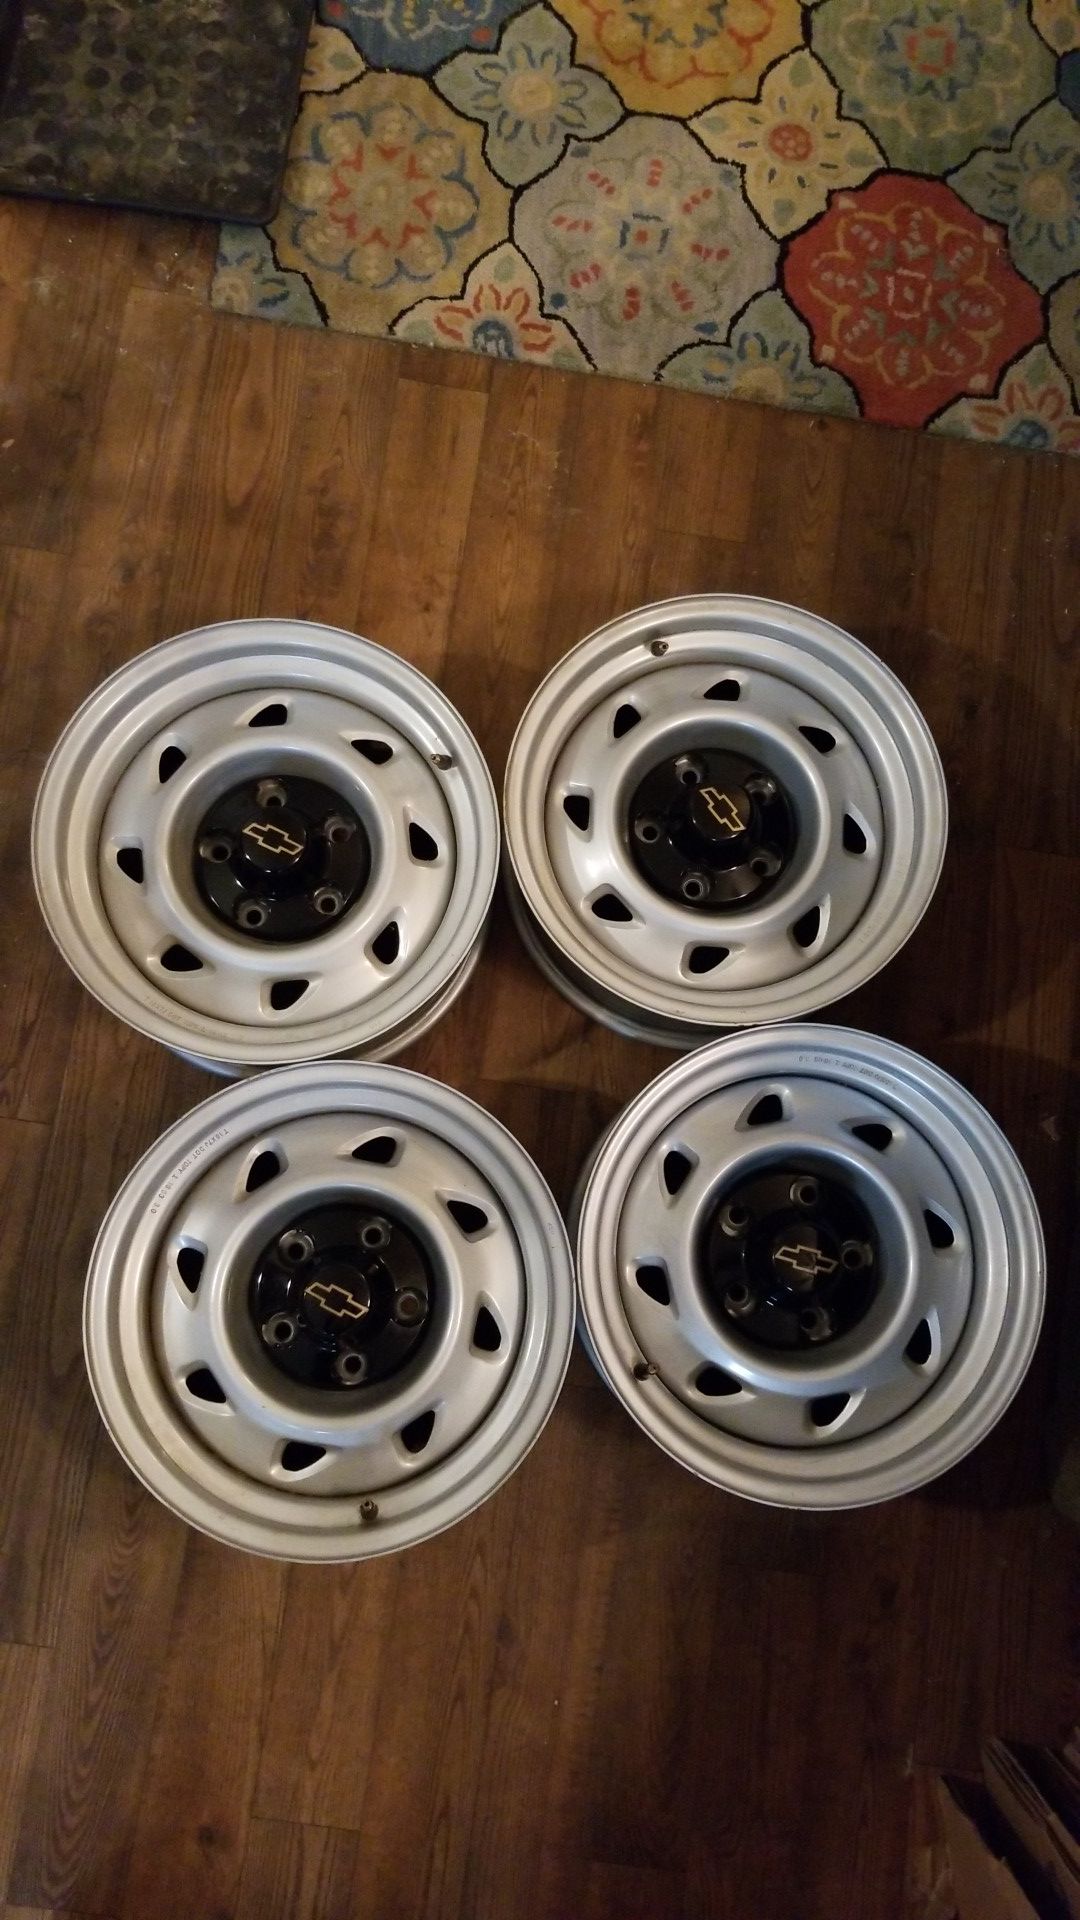 4 x Rims w/ Chevy Stud Covers (NEVER USED)